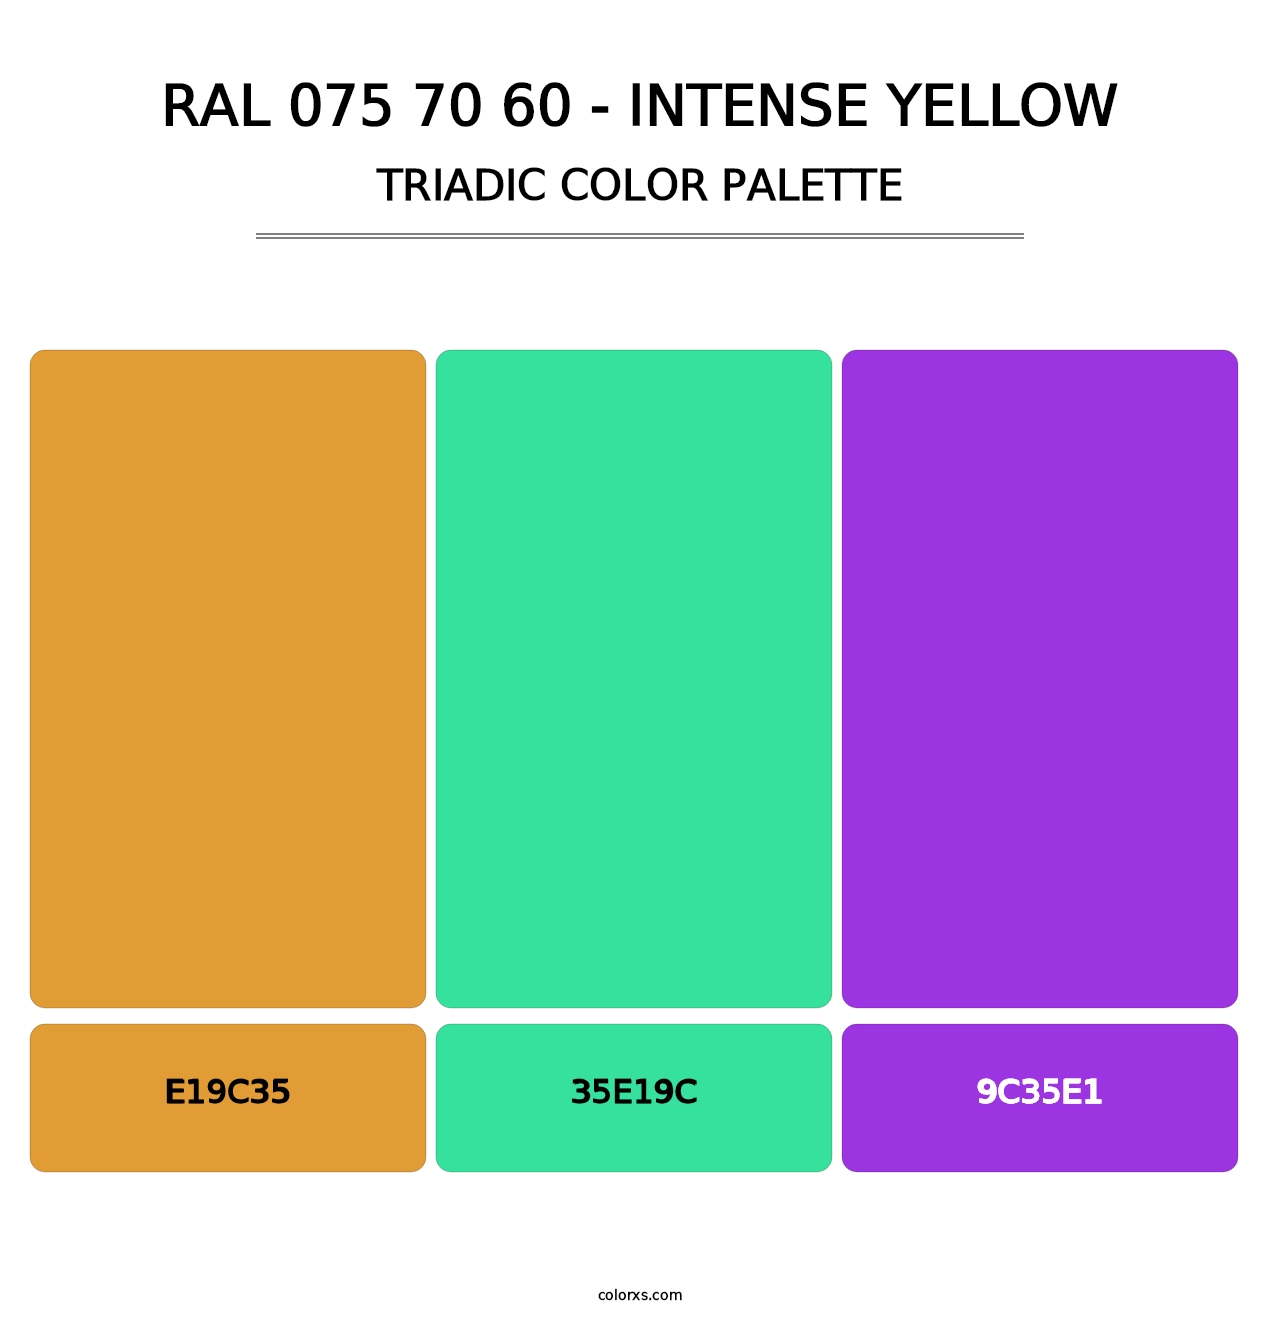 RAL 075 70 60 - Intense Yellow - Triadic Color Palette